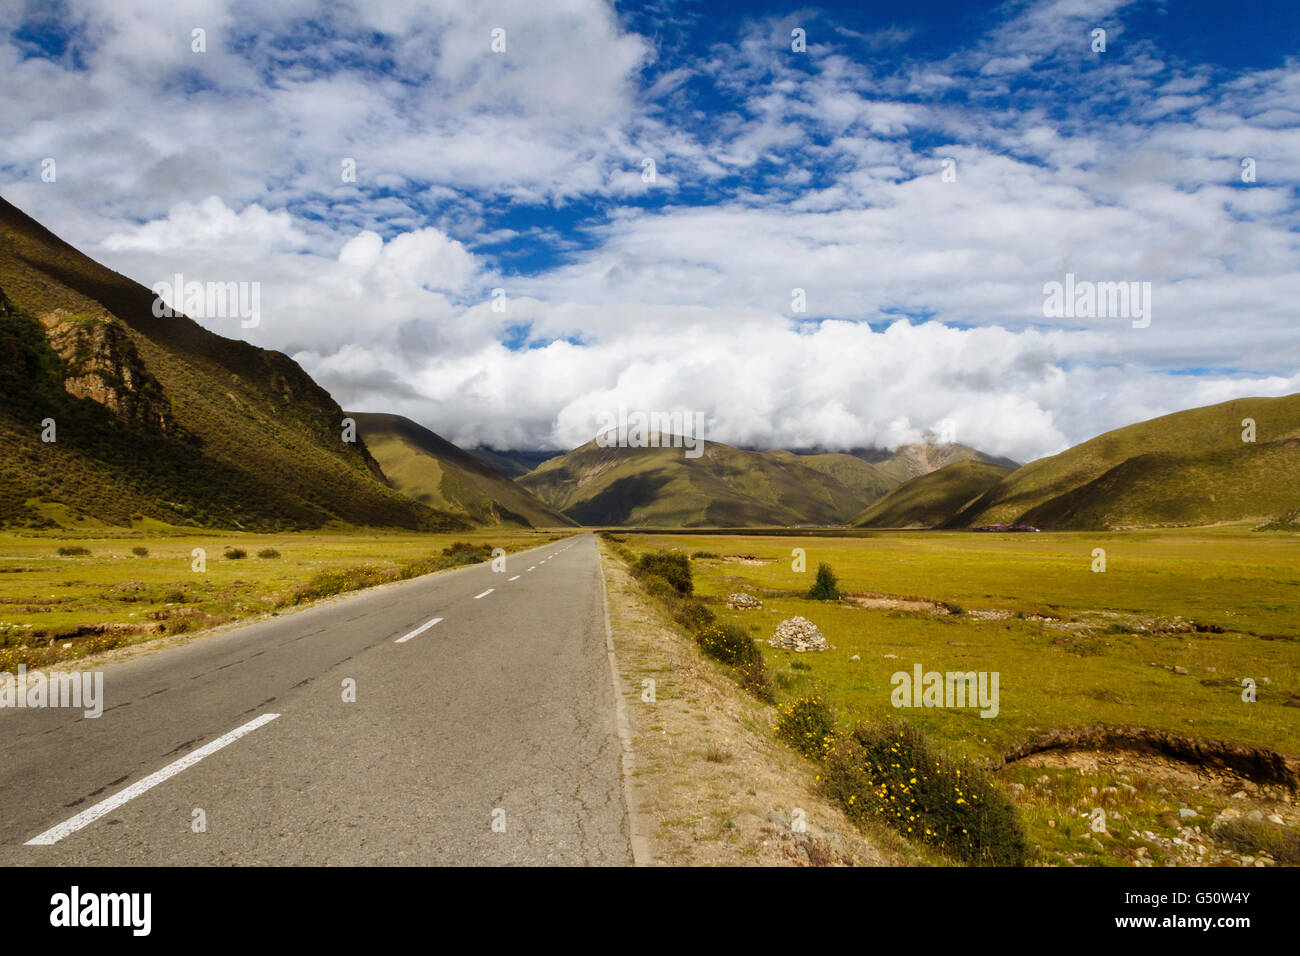 Tibet, China - The view of 318 national road in the wild with beautiful landscape. Stock Photo